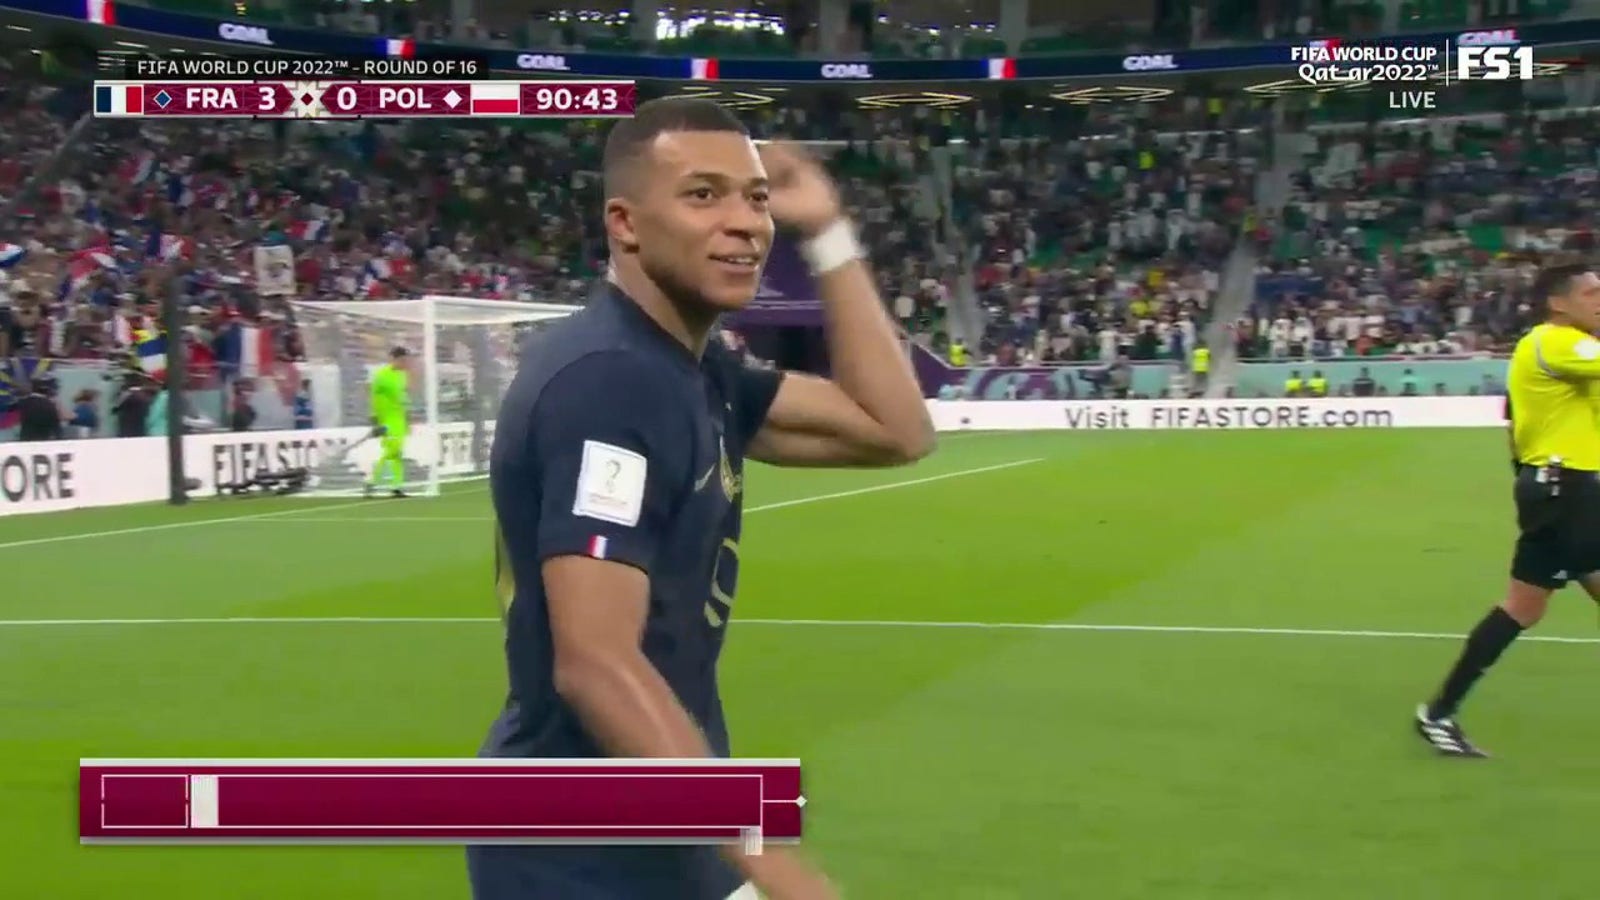 France's Kylian Mbappé scores in the 90th minute against Poland